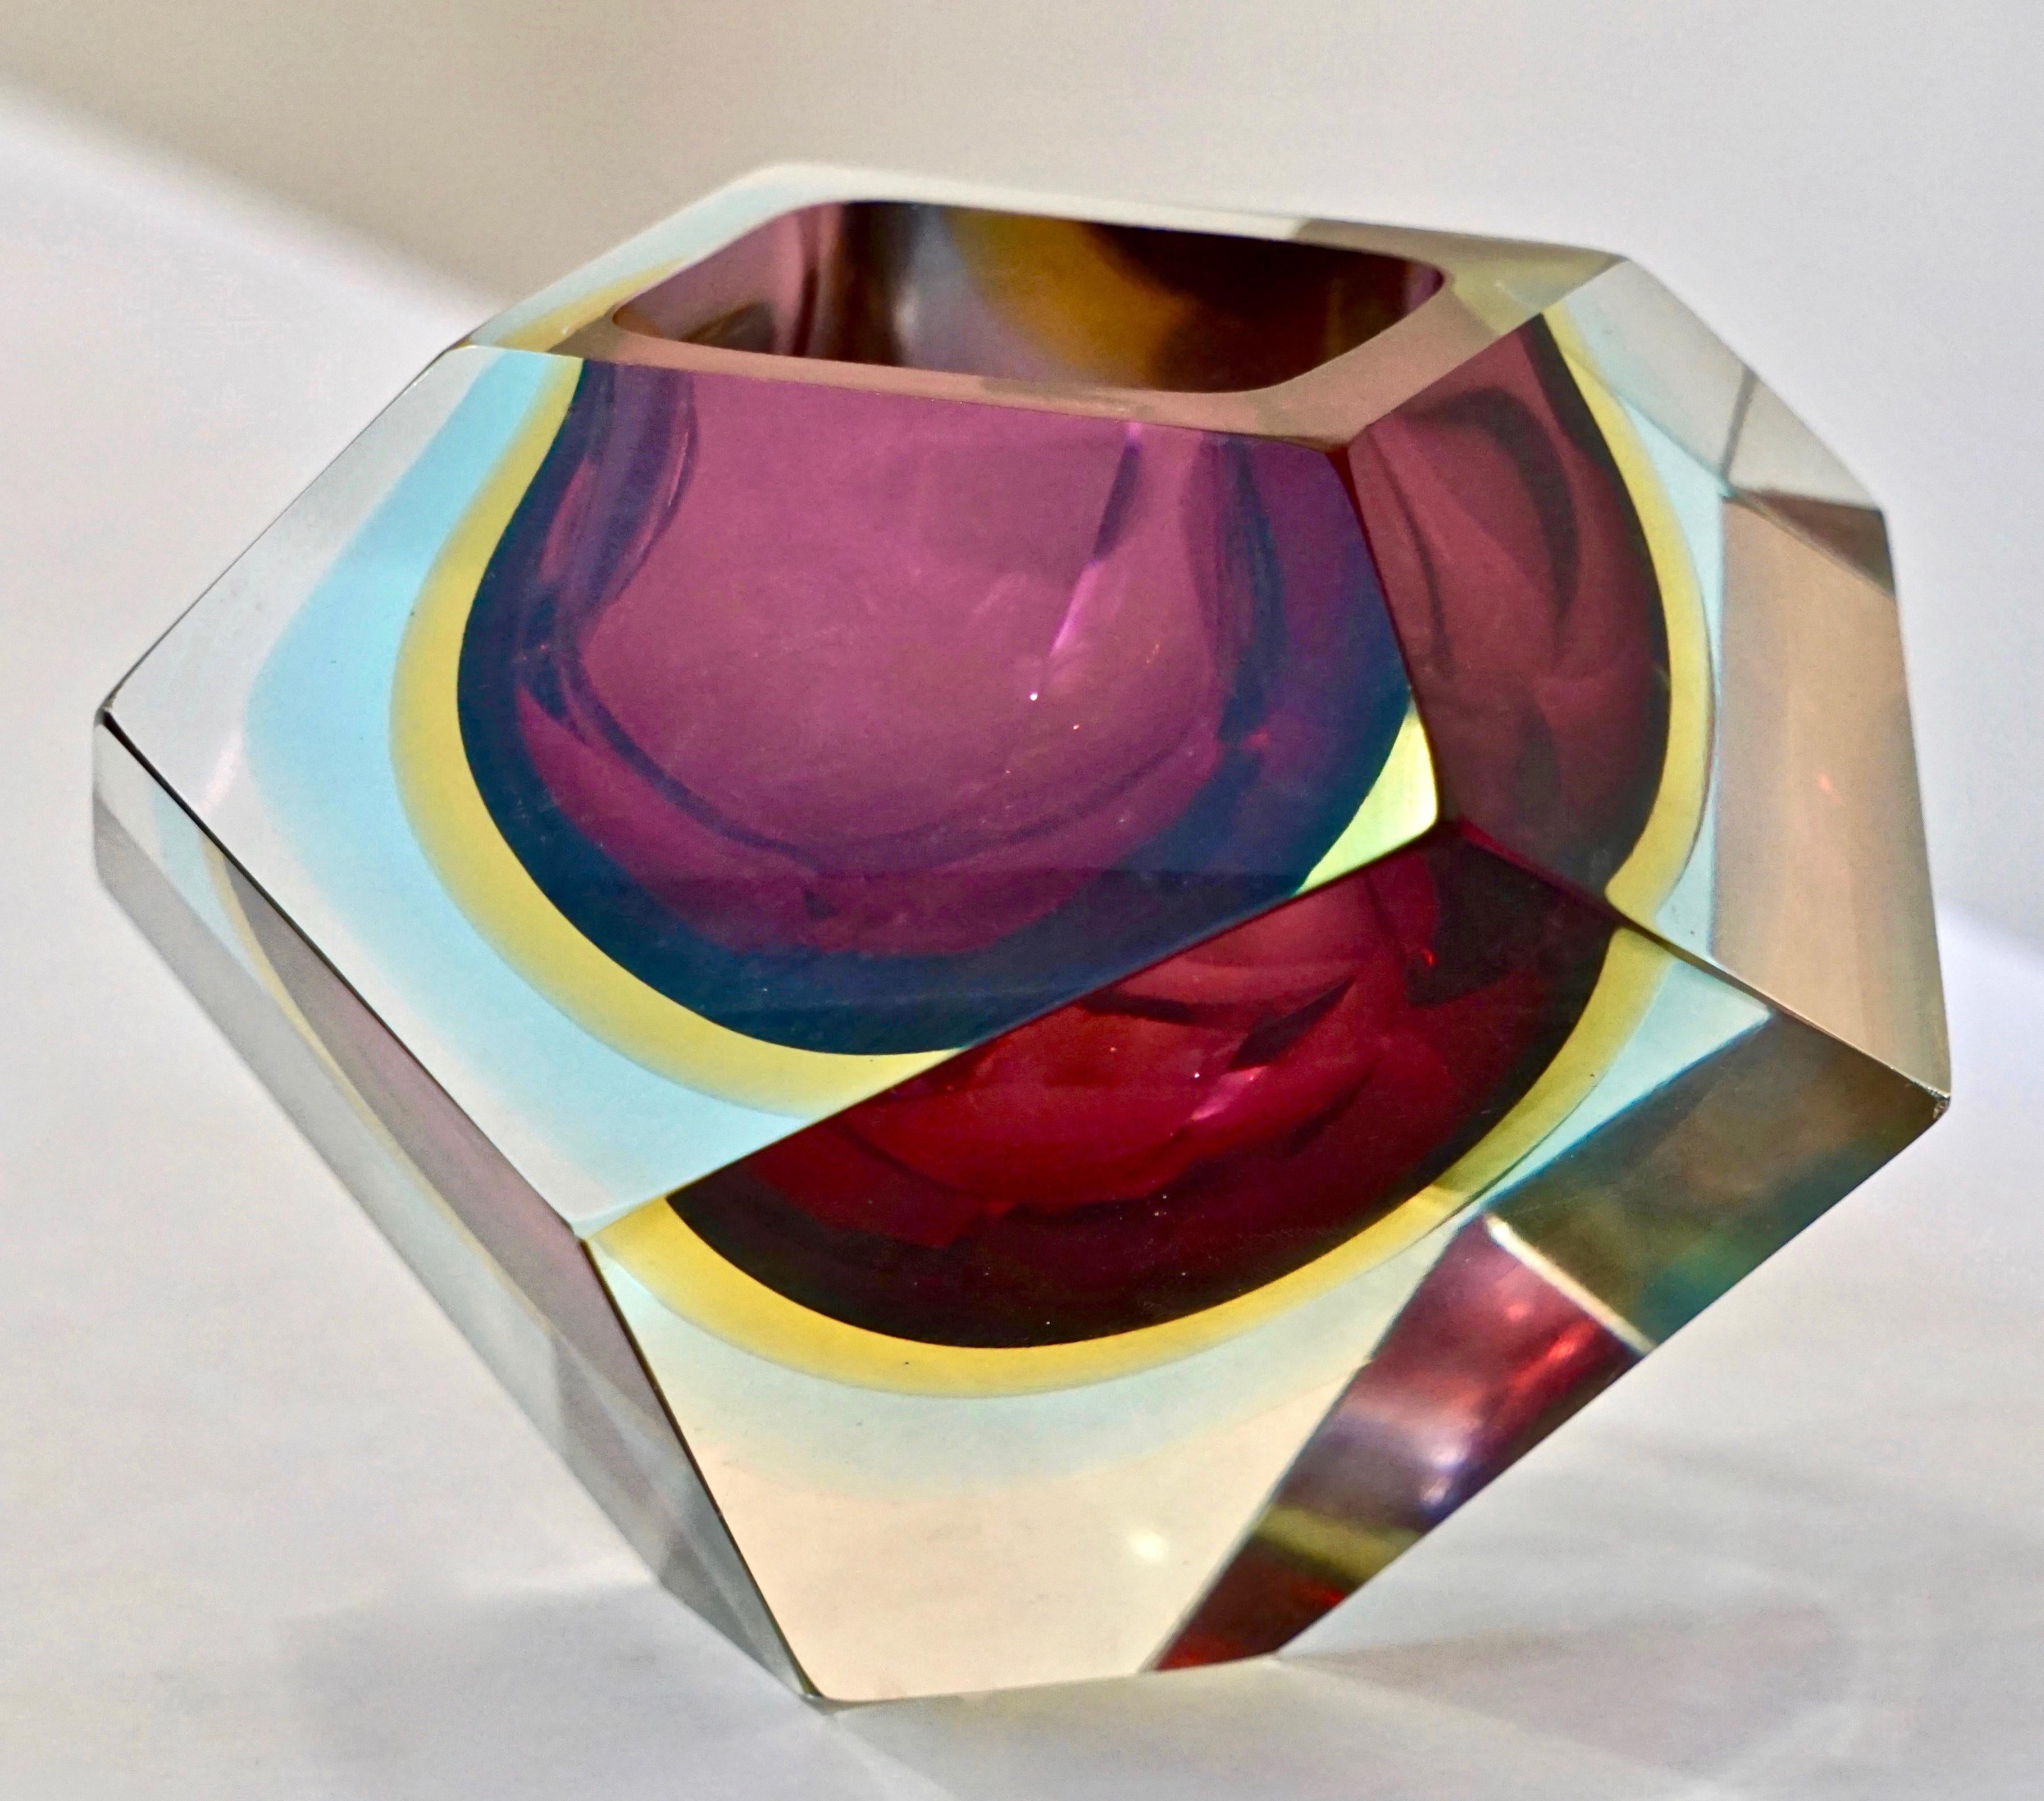 1950s Italian diamond faceted Art Glass catchall or paperweight in hand-cut Murano Glass, a very decorative bowl or ashtray with a diamond multifaceted exterior which catches the light like a prism. This precious piece has a flat cut polished top